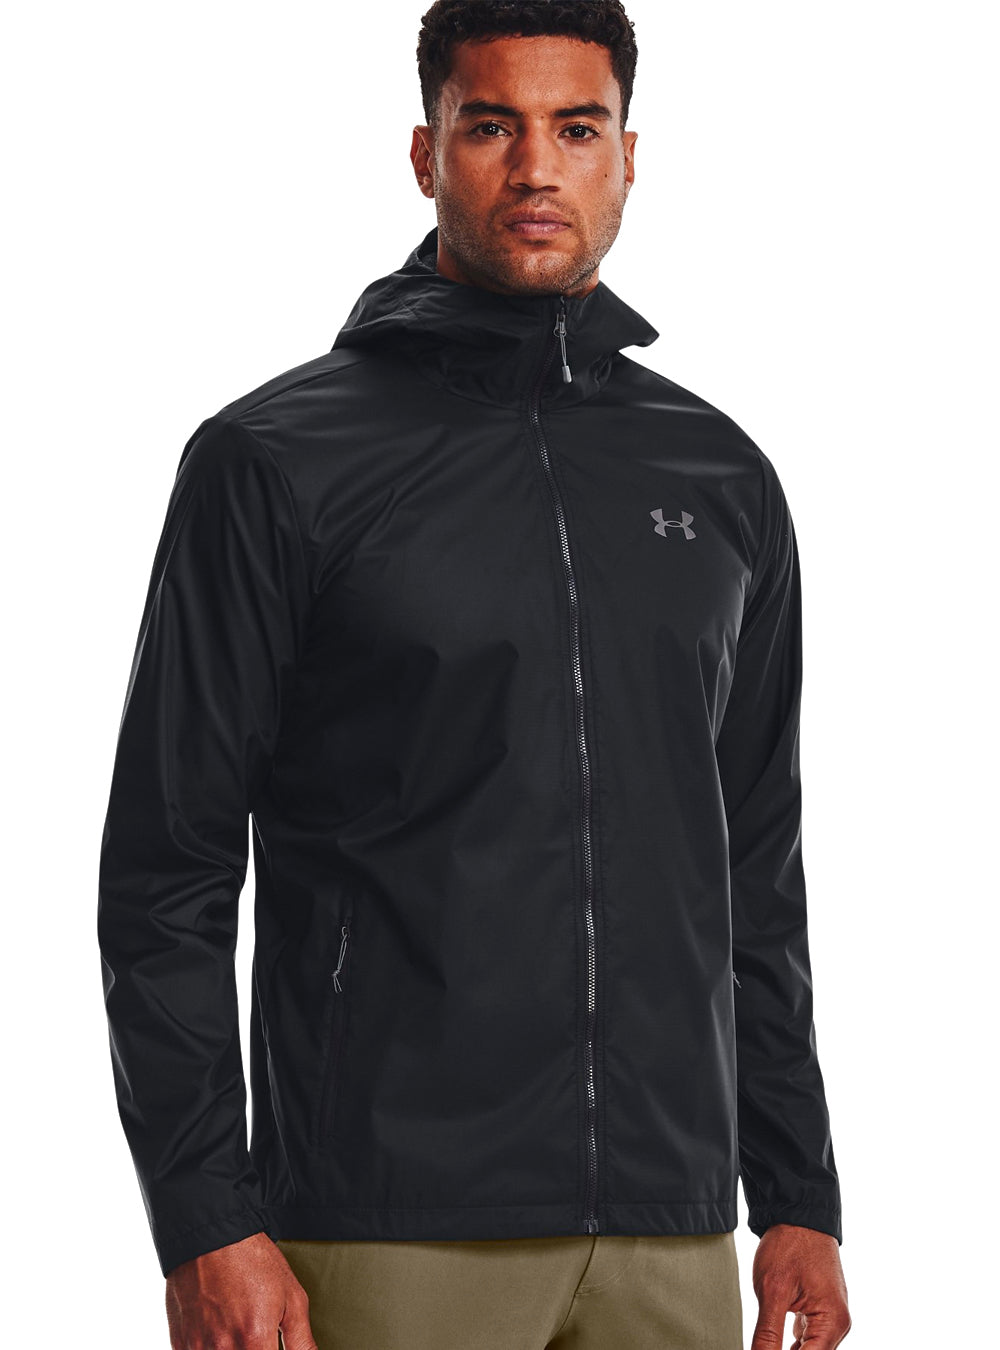 Under Armour Men's Tactical Duty Jacket, X-Small, Black/Black : Amazon.in:  Clothing & Accessories